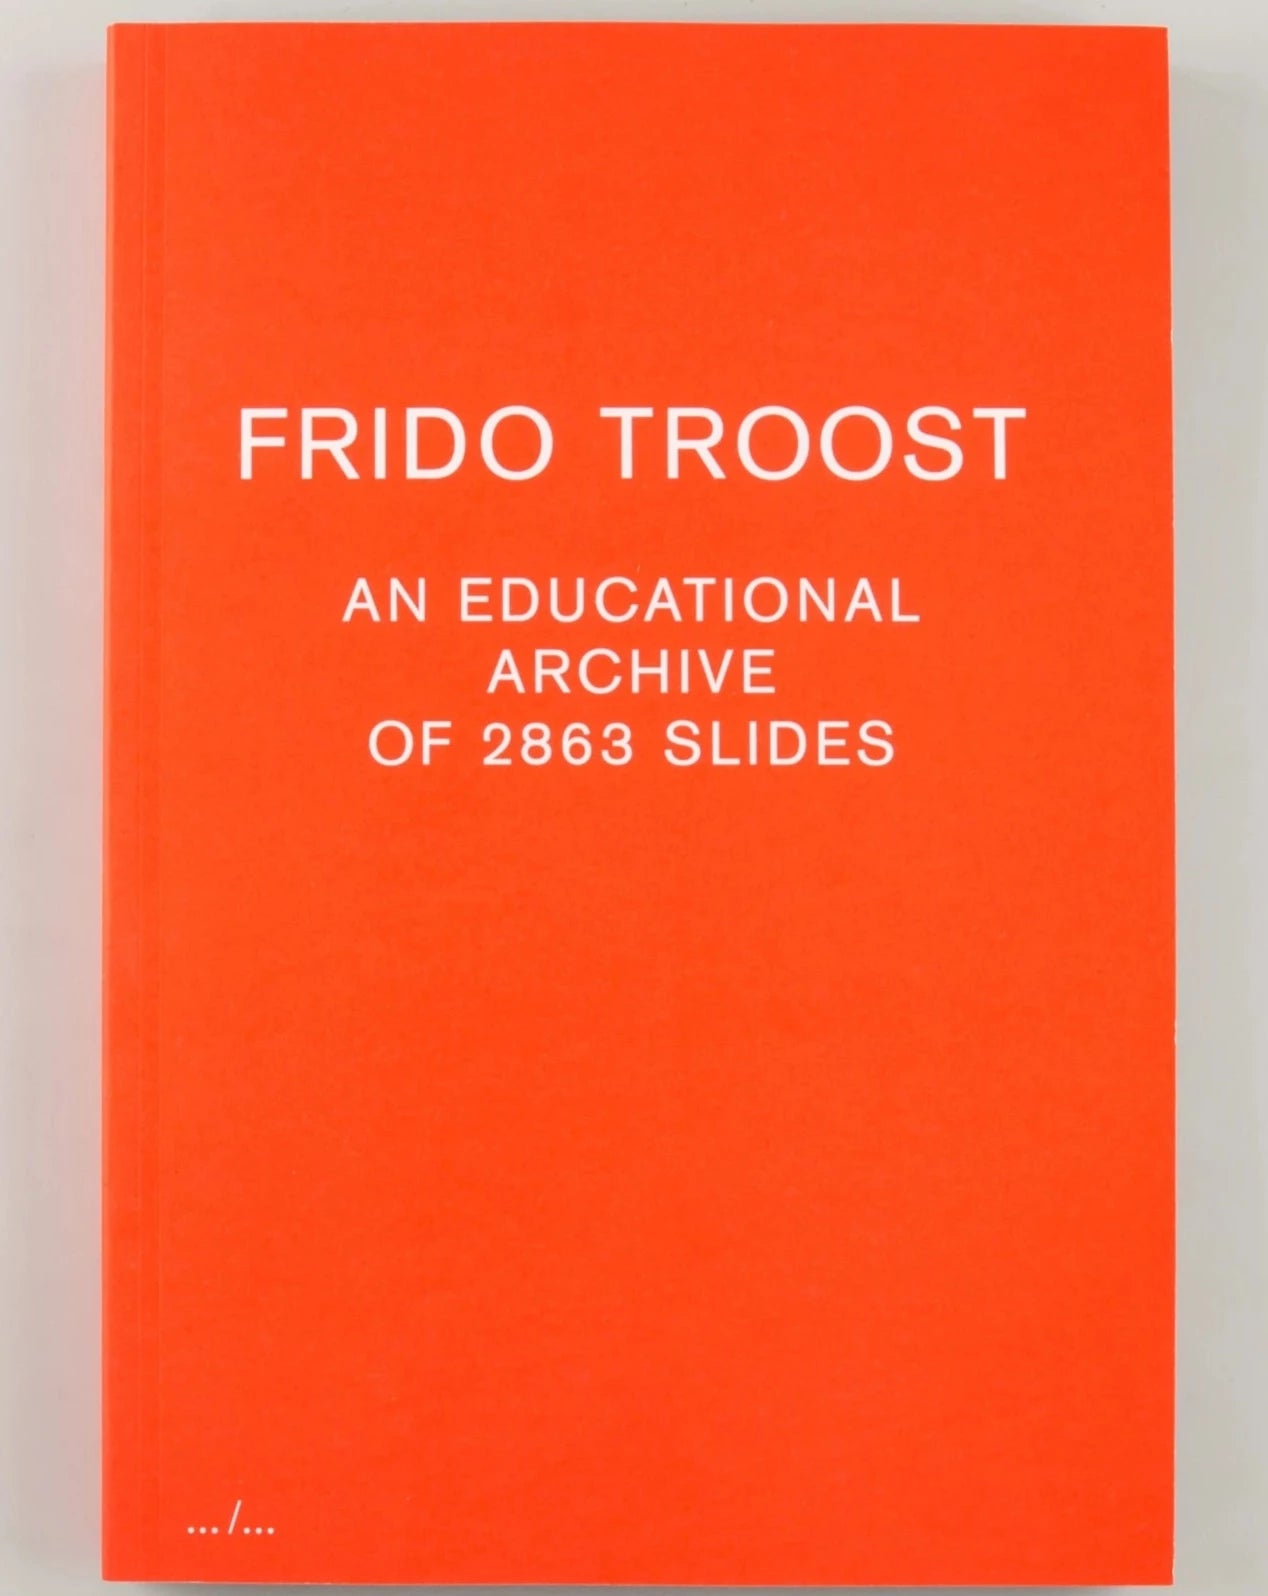 Frido Troost - An Educational Archive of 2863 Slides